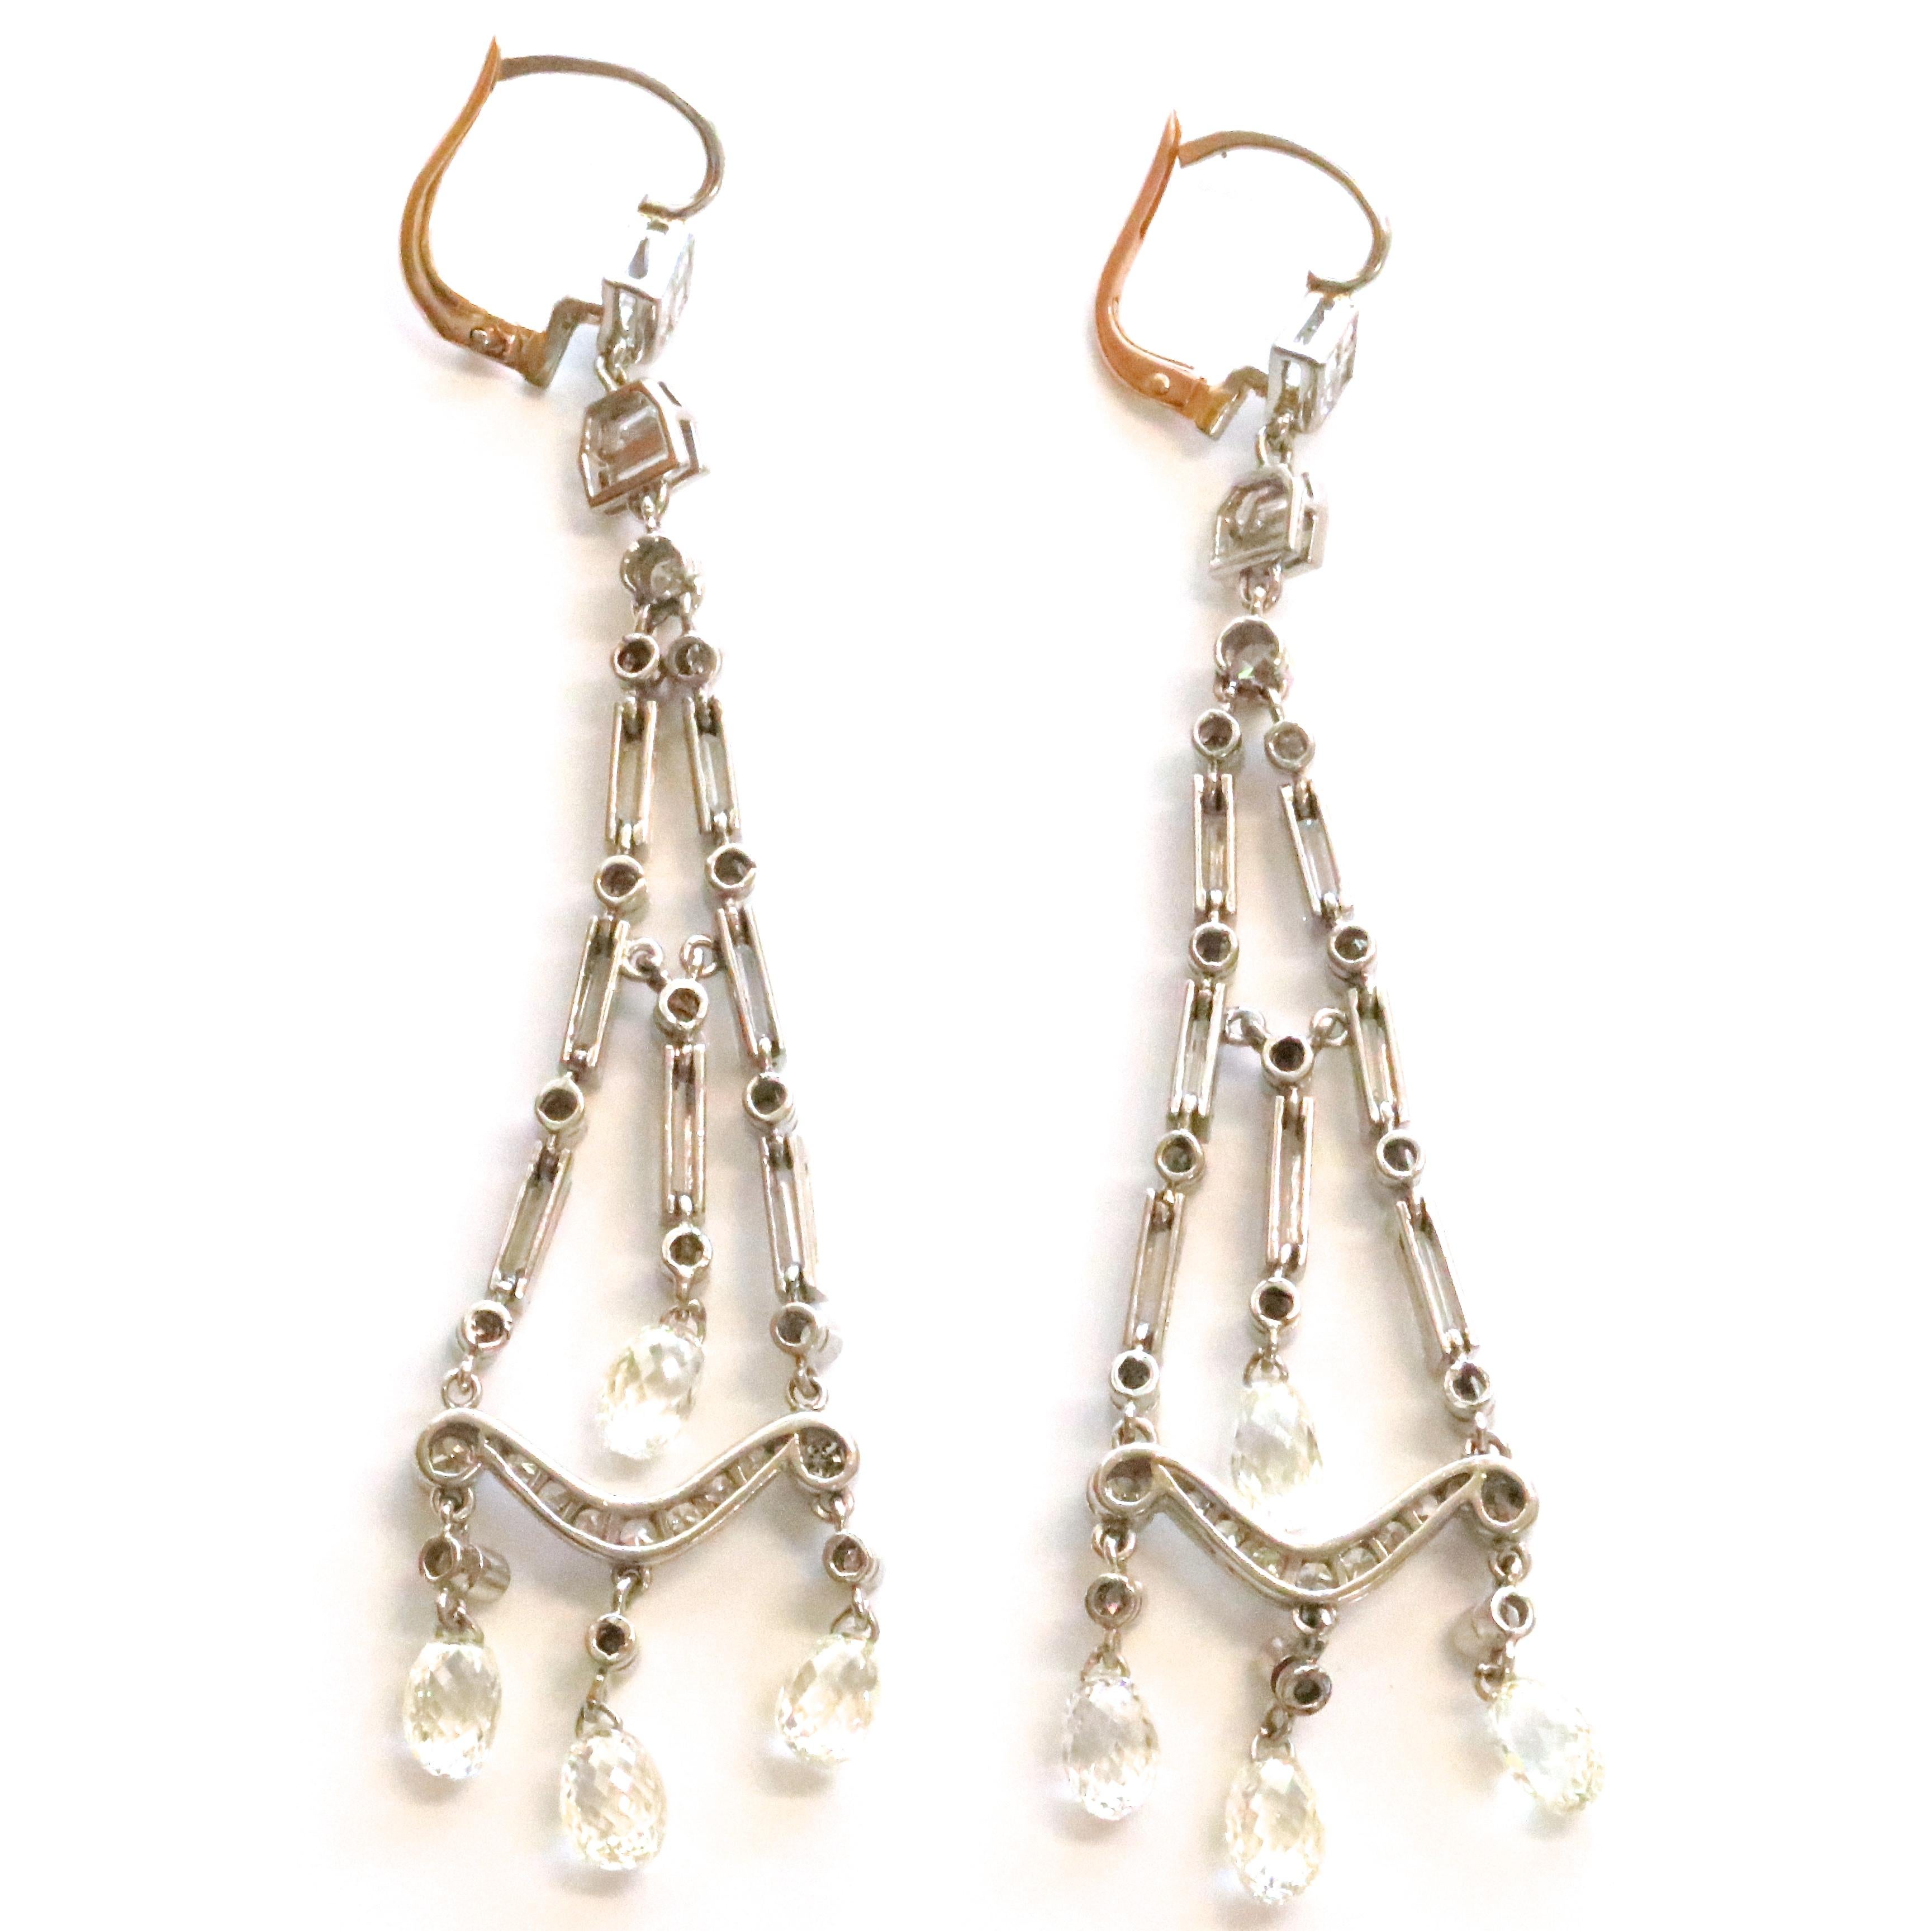 These new Art Deco style earrings realistically represents the design of the era. They can be worn for a night out or for a walk in the park. Even with a mask on they will still be noticed. Diamond Platinum Chandelier Earrings feature 8 carre cuts,